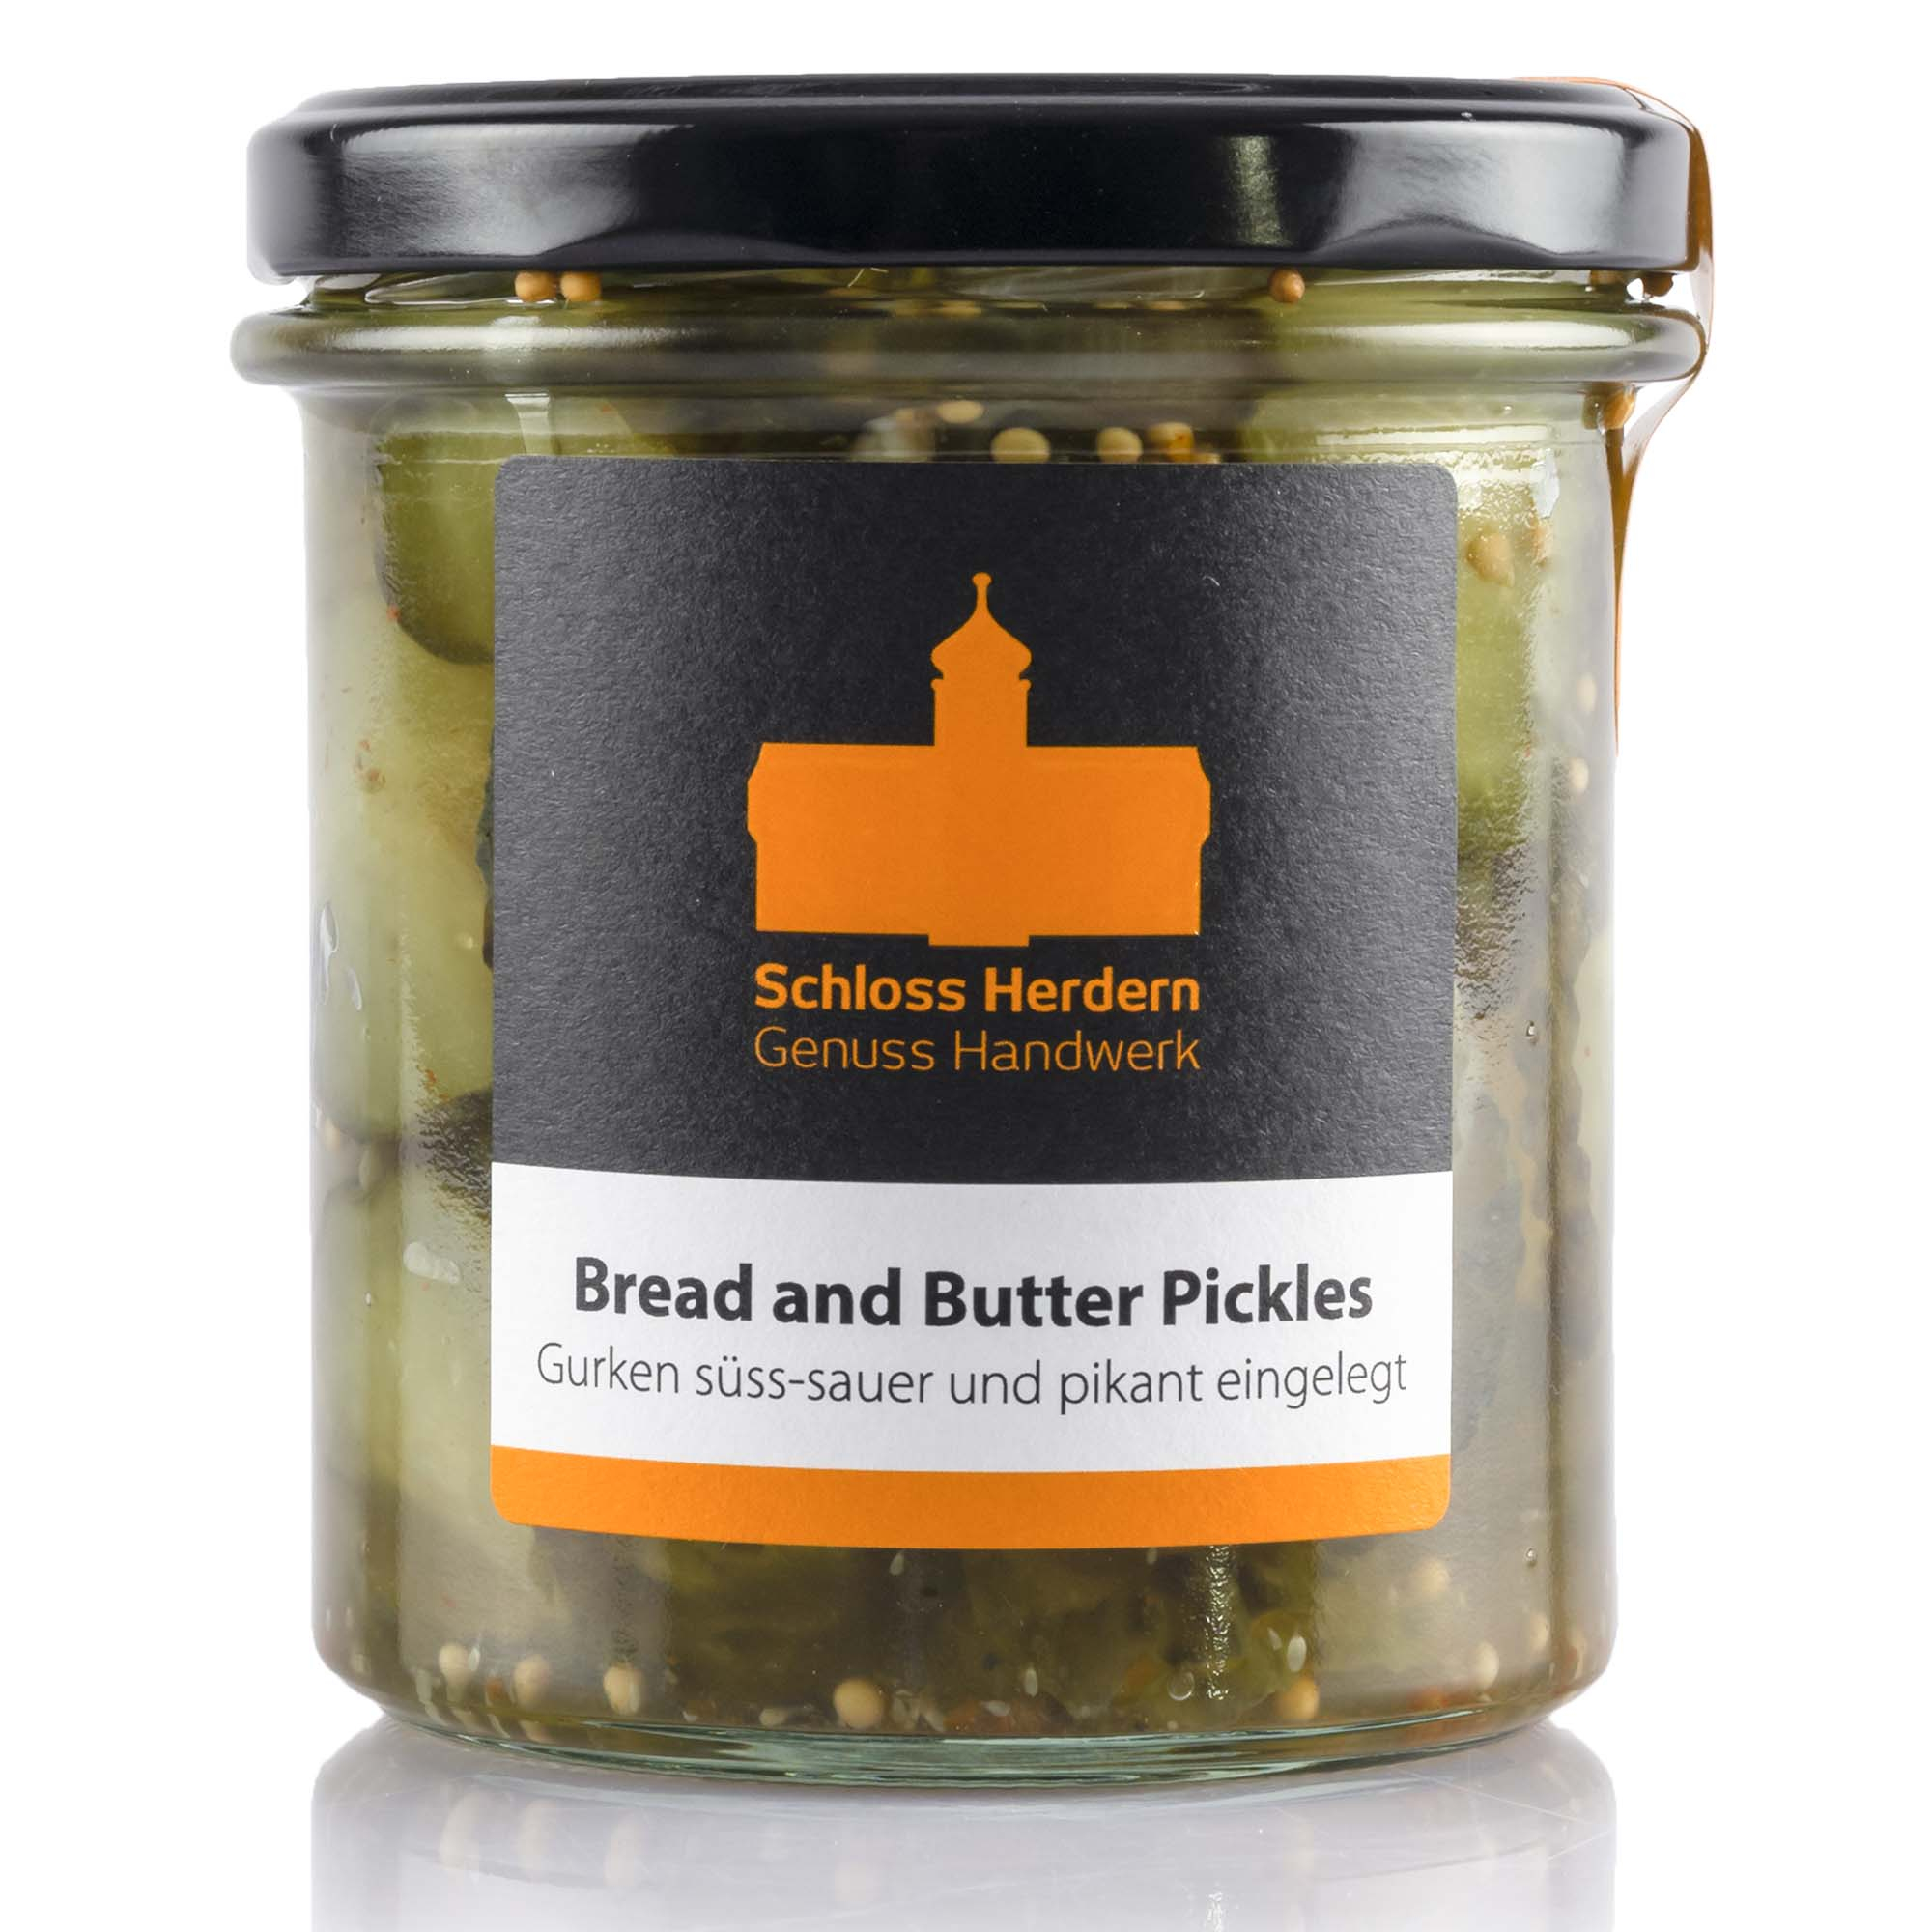 Bread and Butter Pickles, 225g